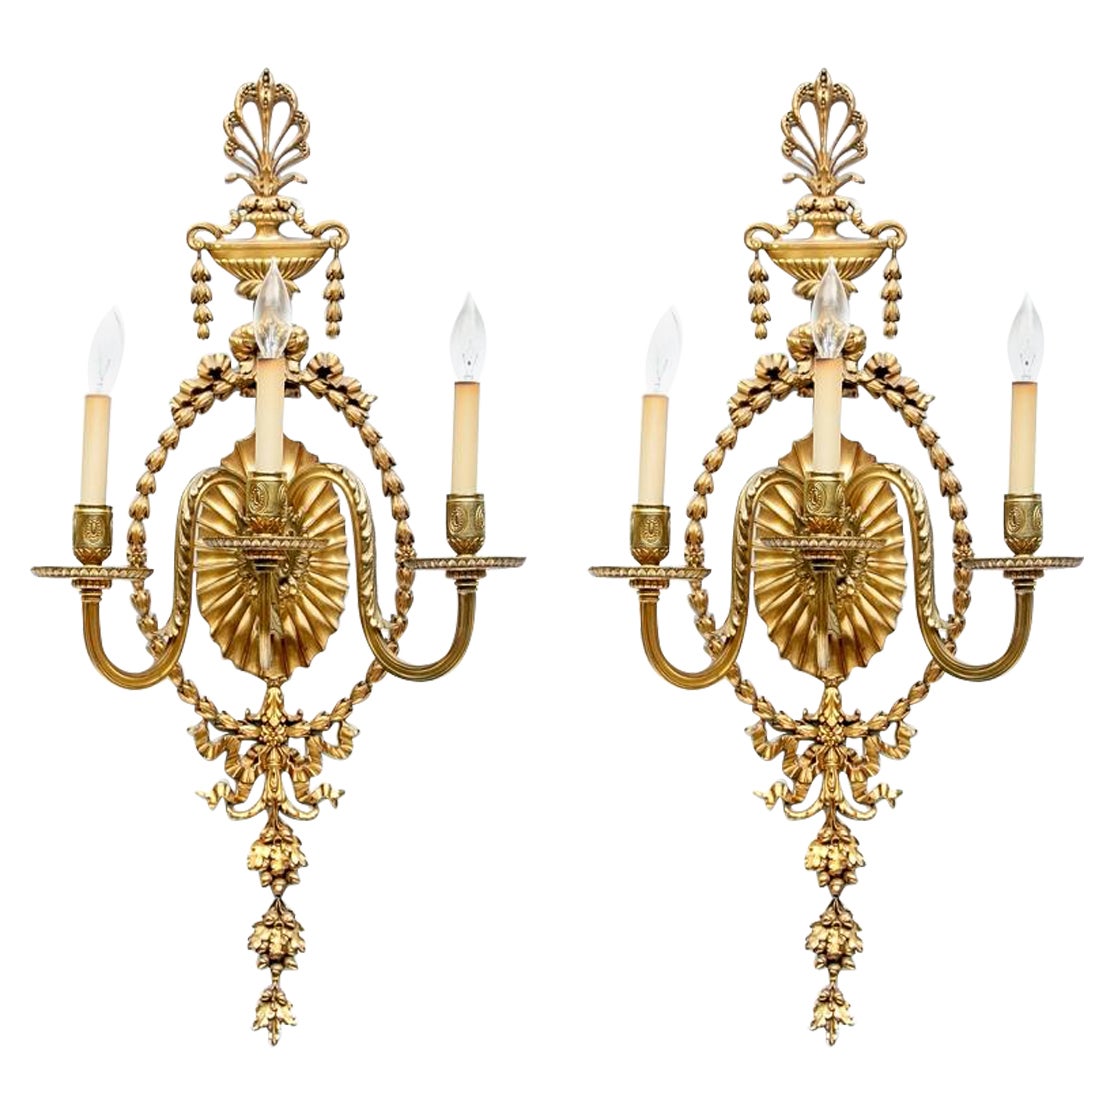 Pair of Large Scale Gilt Adam Style Three Light Electric Sconces